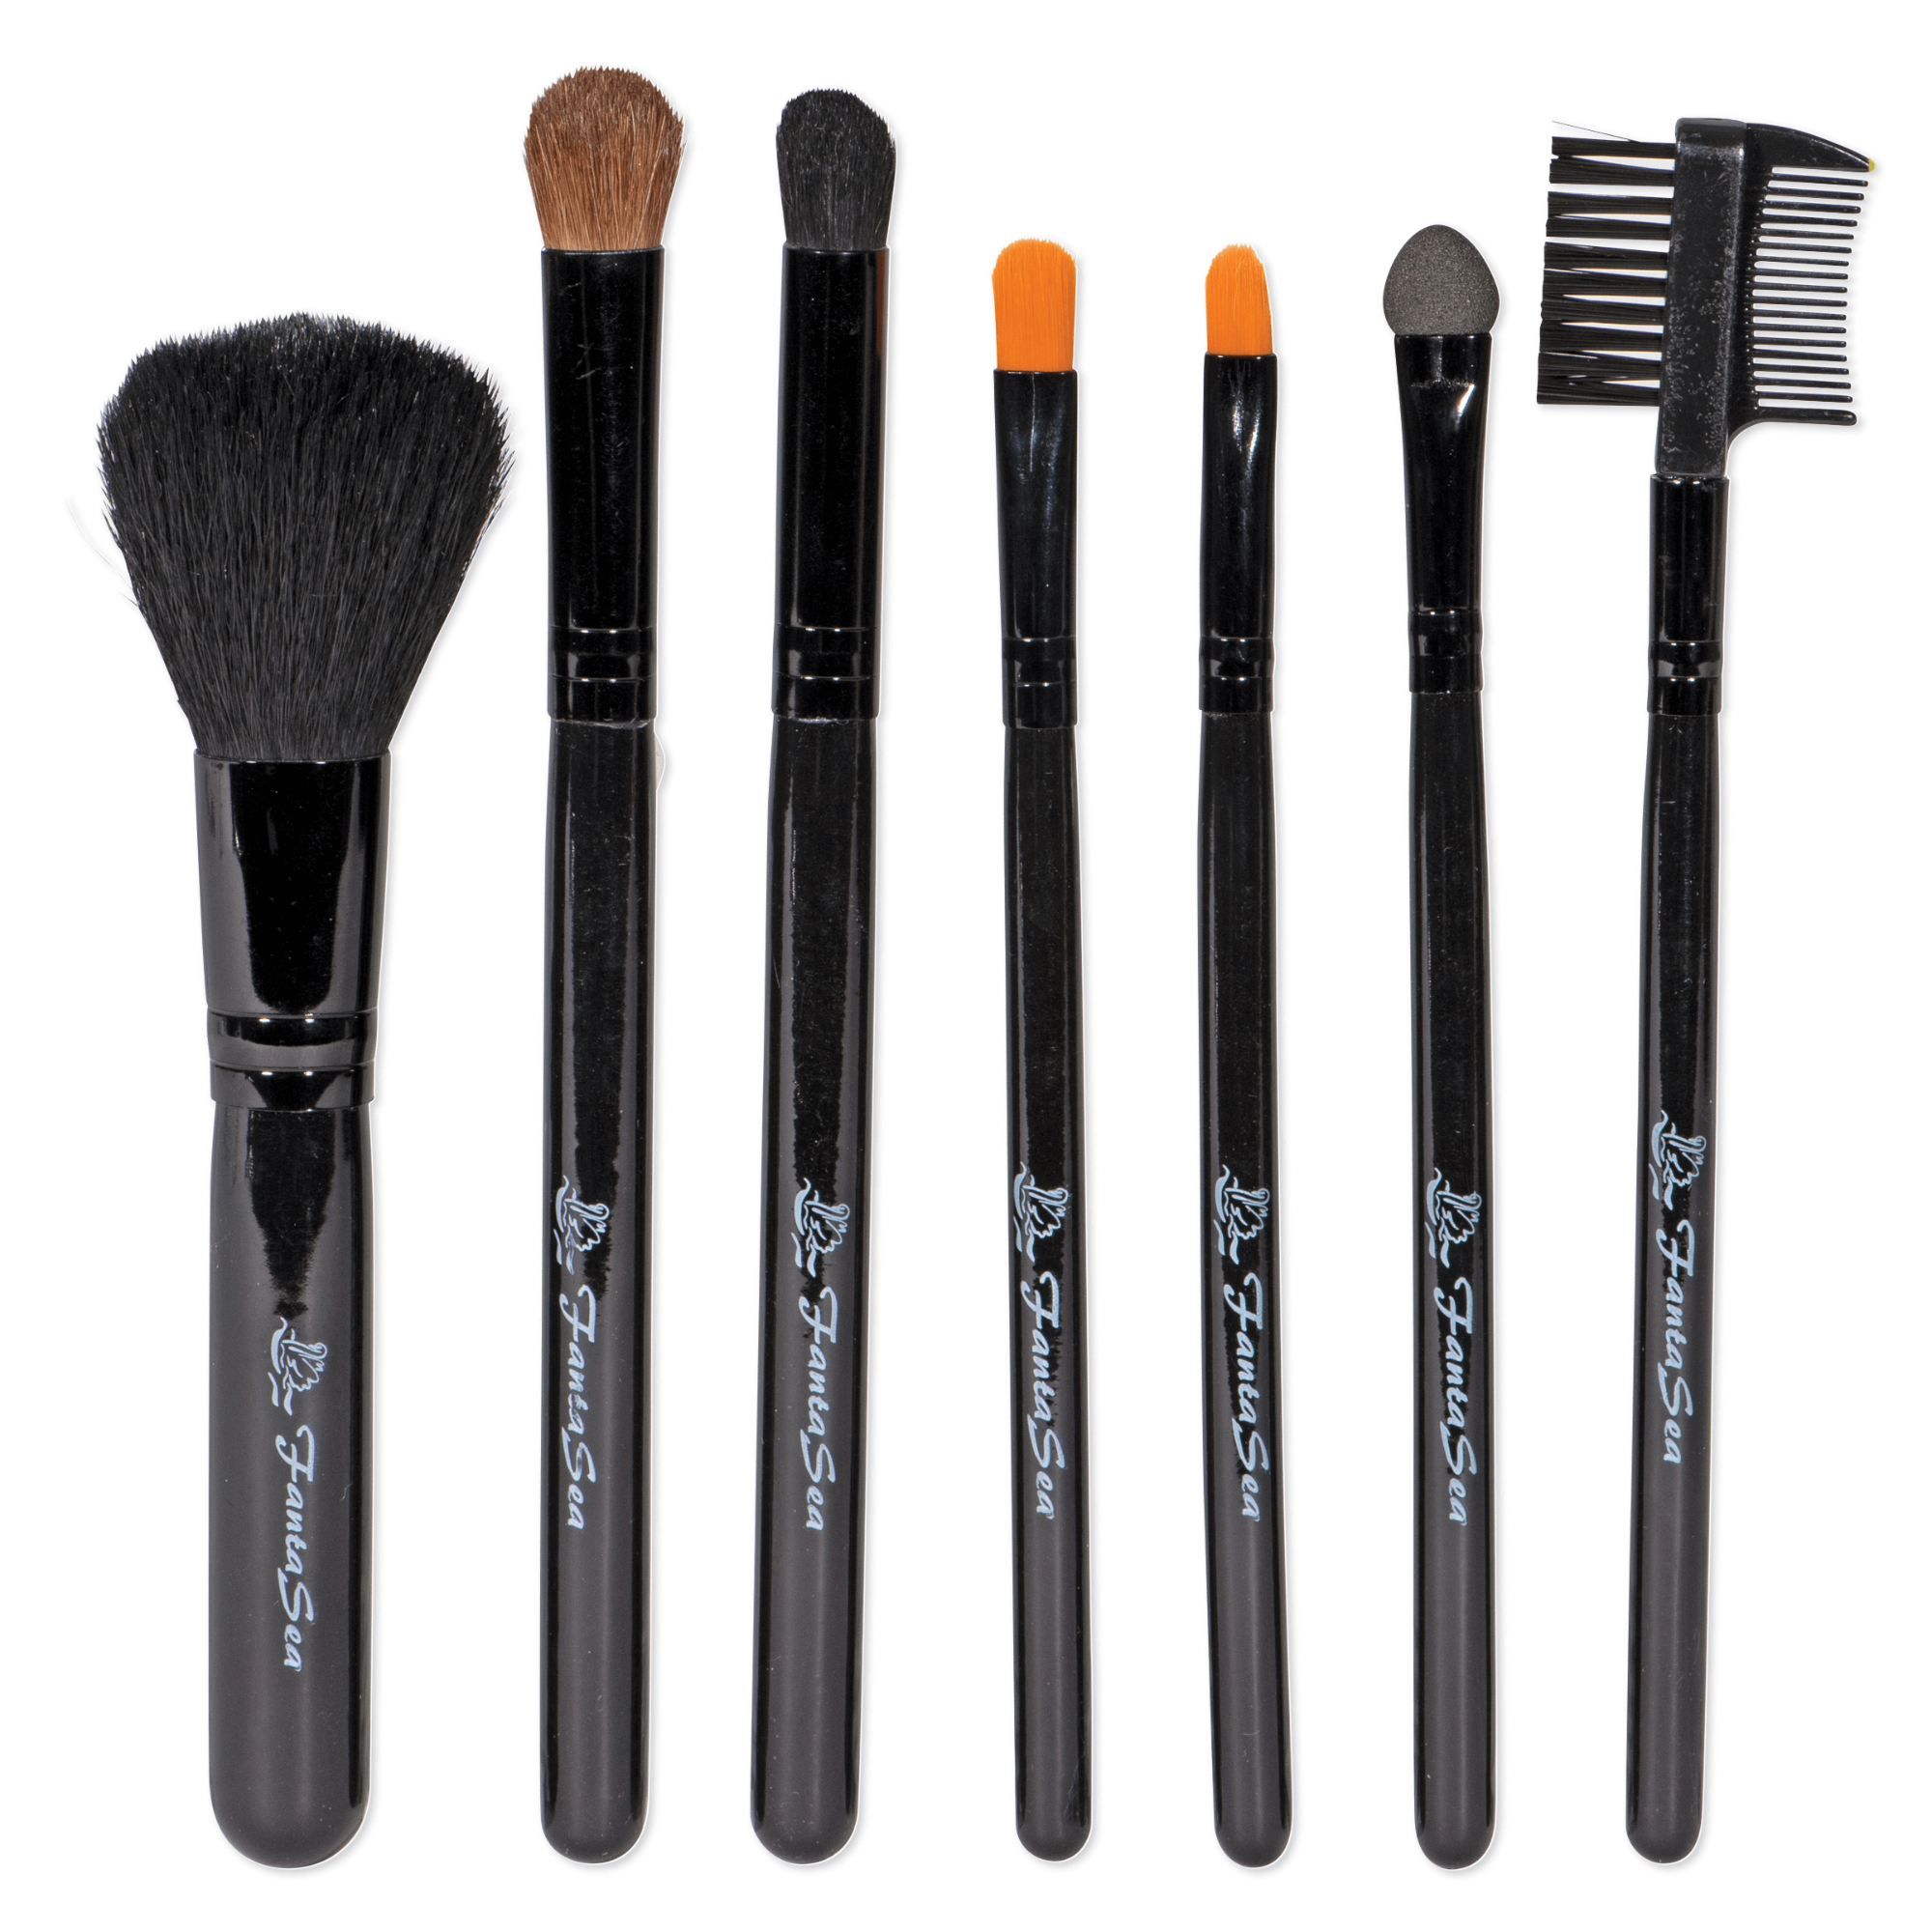 Makeup Brush Set with Case - 7 pc.